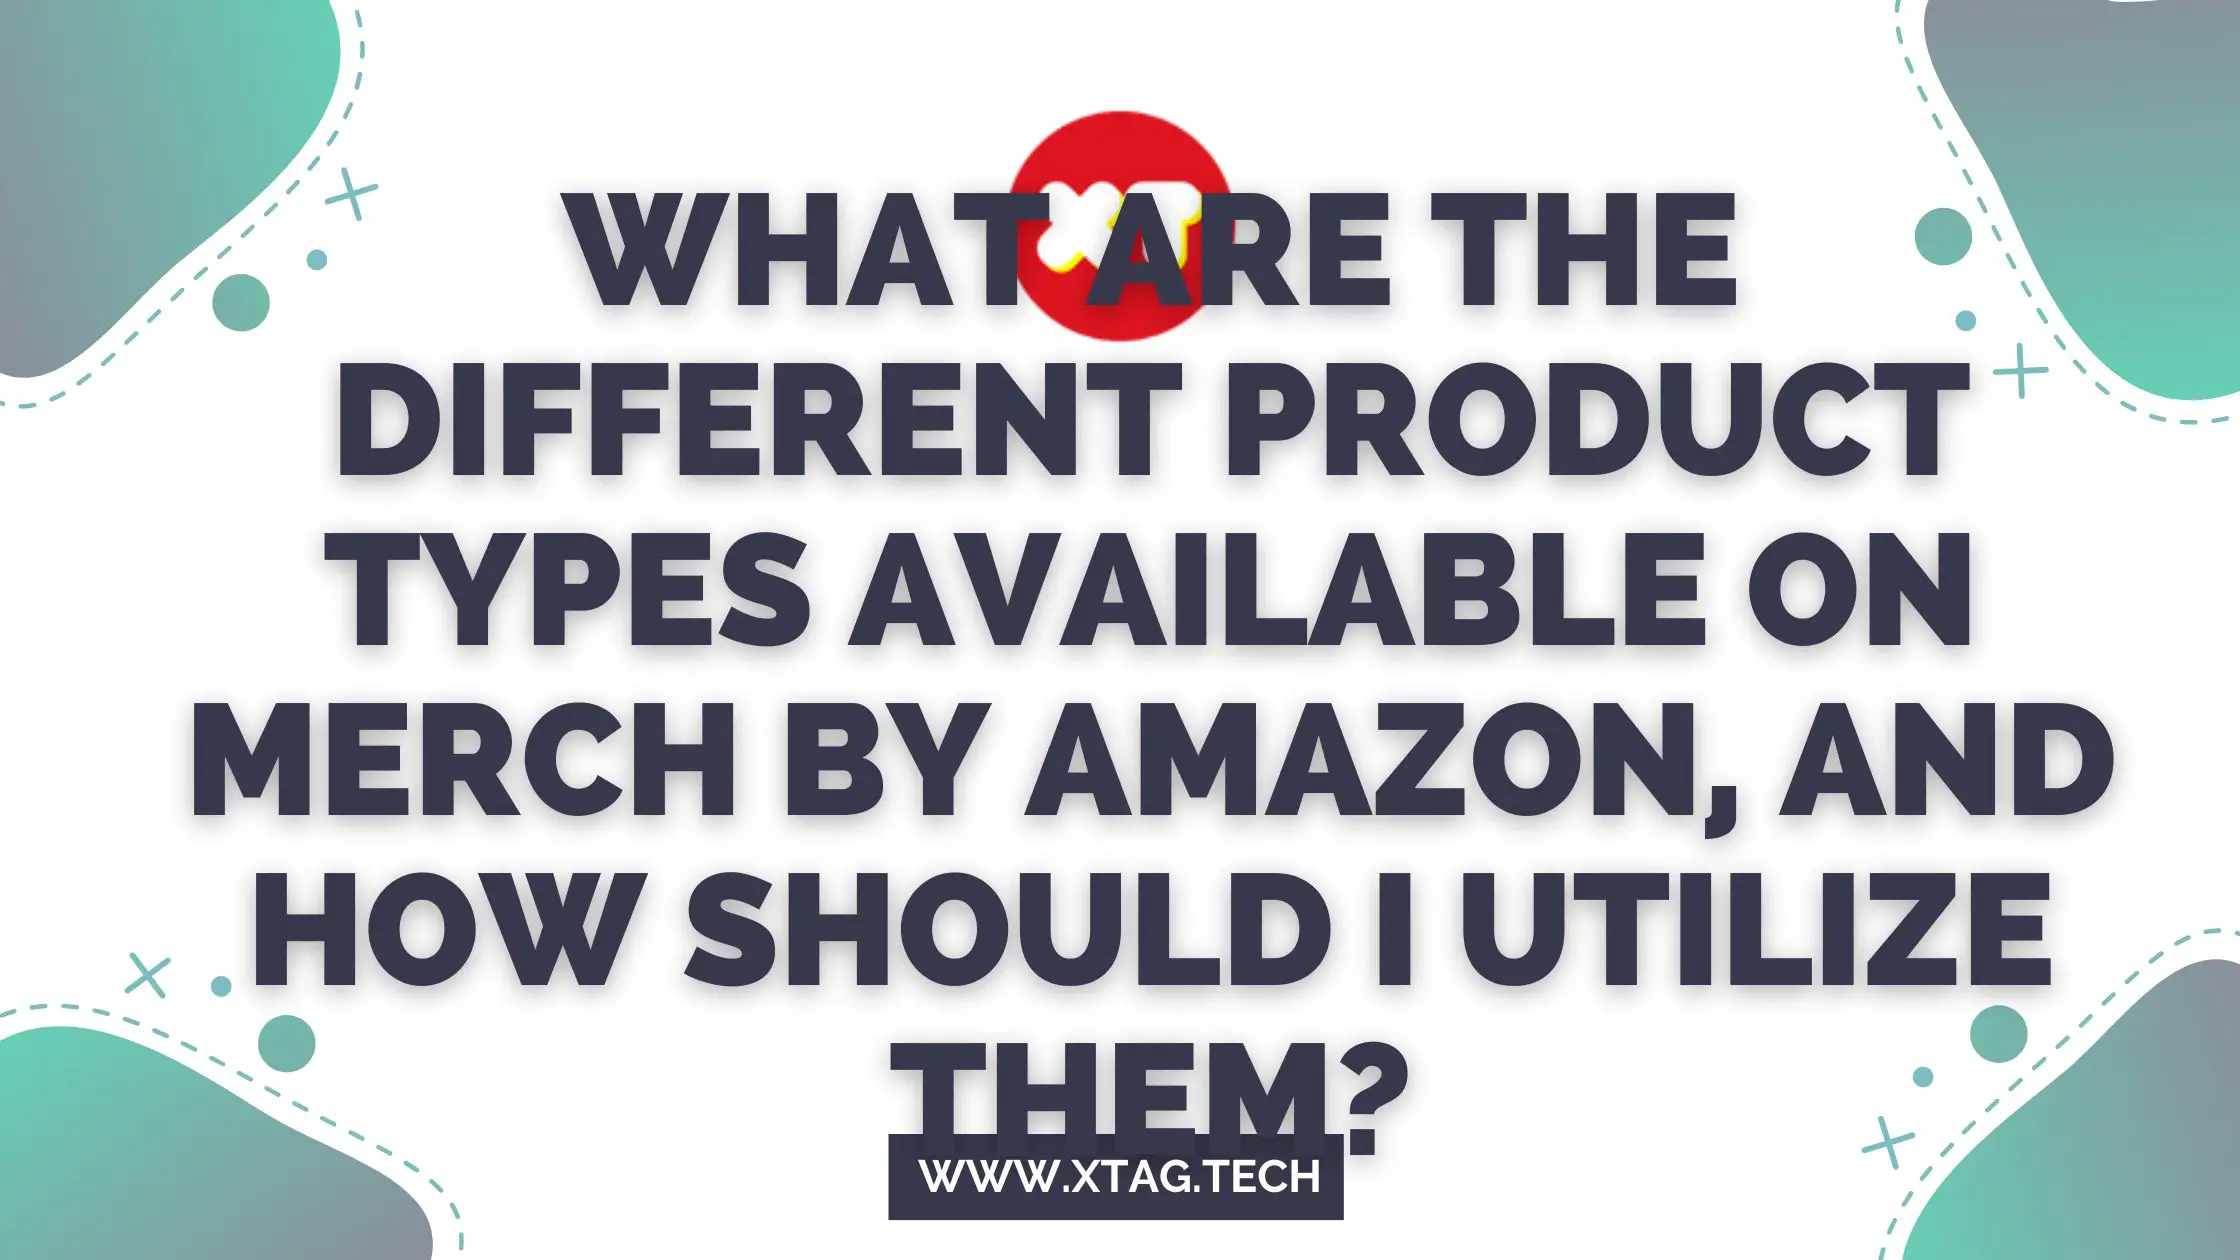 What Are The Different Product Types Available On Merch By Amazon, And How Should I Utilize Them?